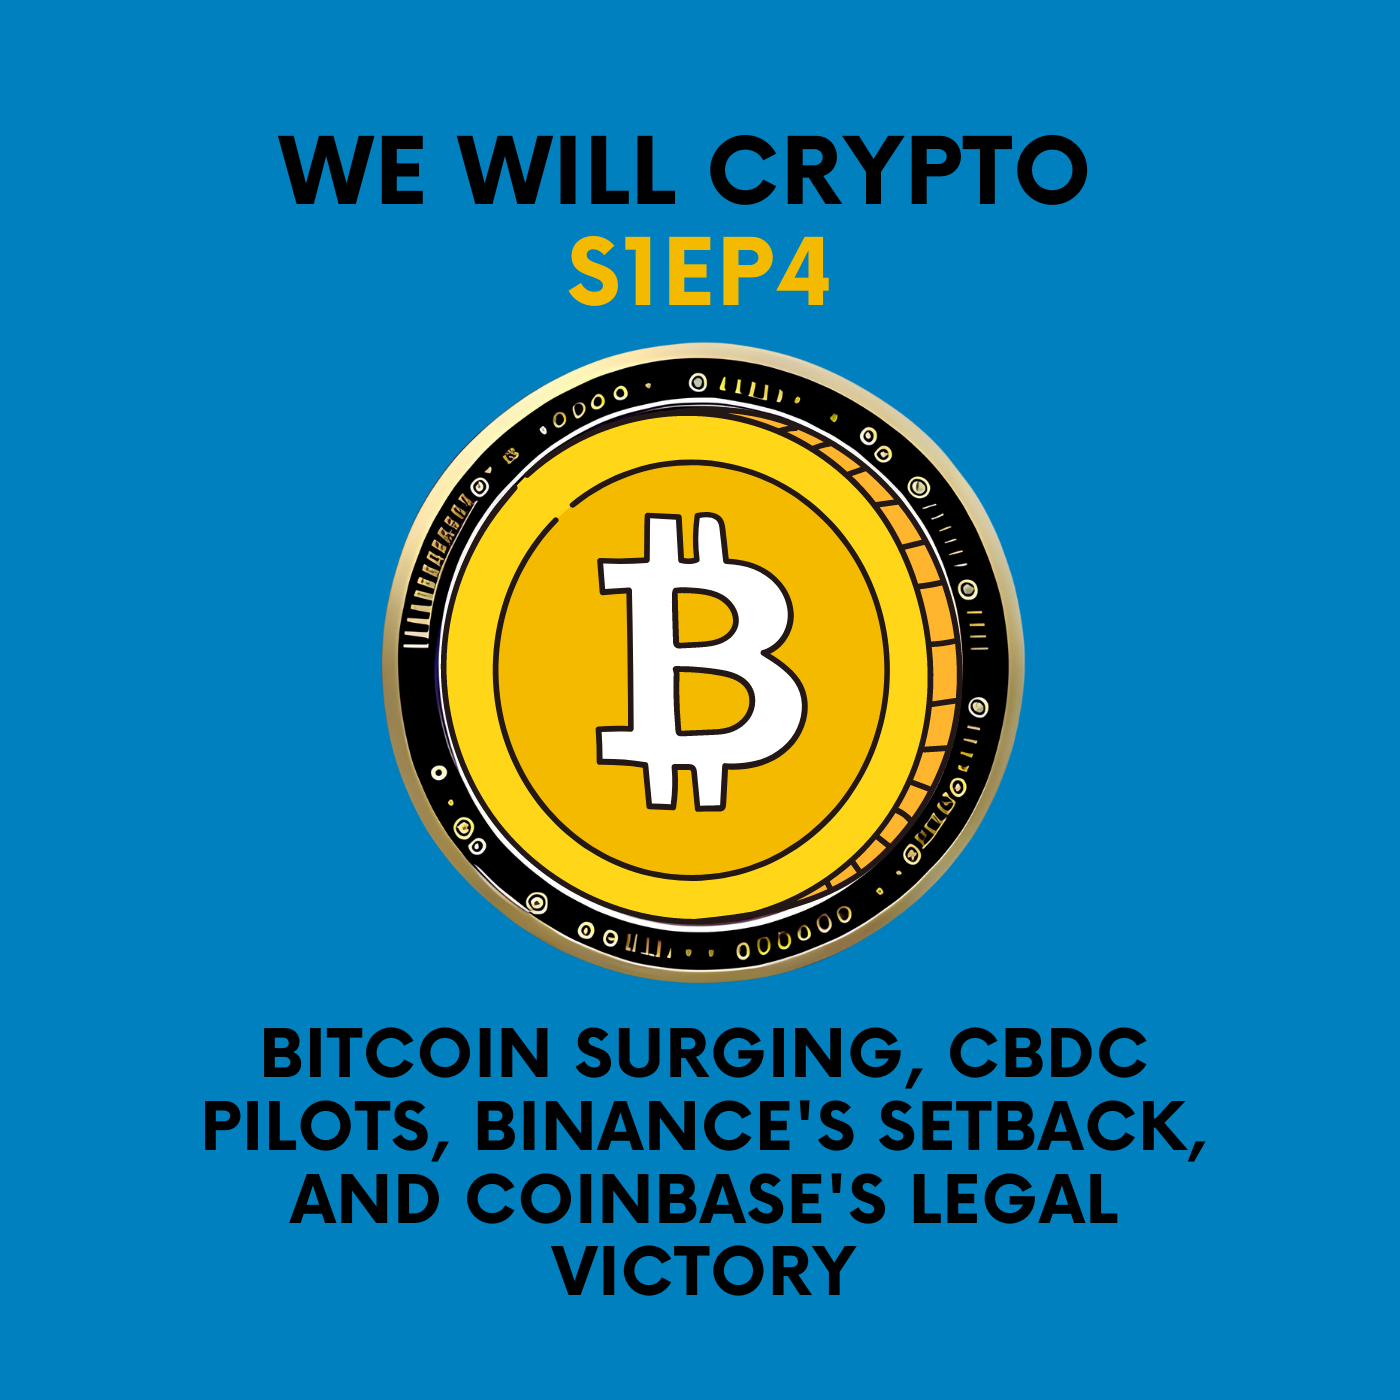 Bitcoin Surging, CBDC Pilots, Regulatory Challenges, Binance's Setback, and Coinbase's Legal Victory, crypto news saturday june 24 2023